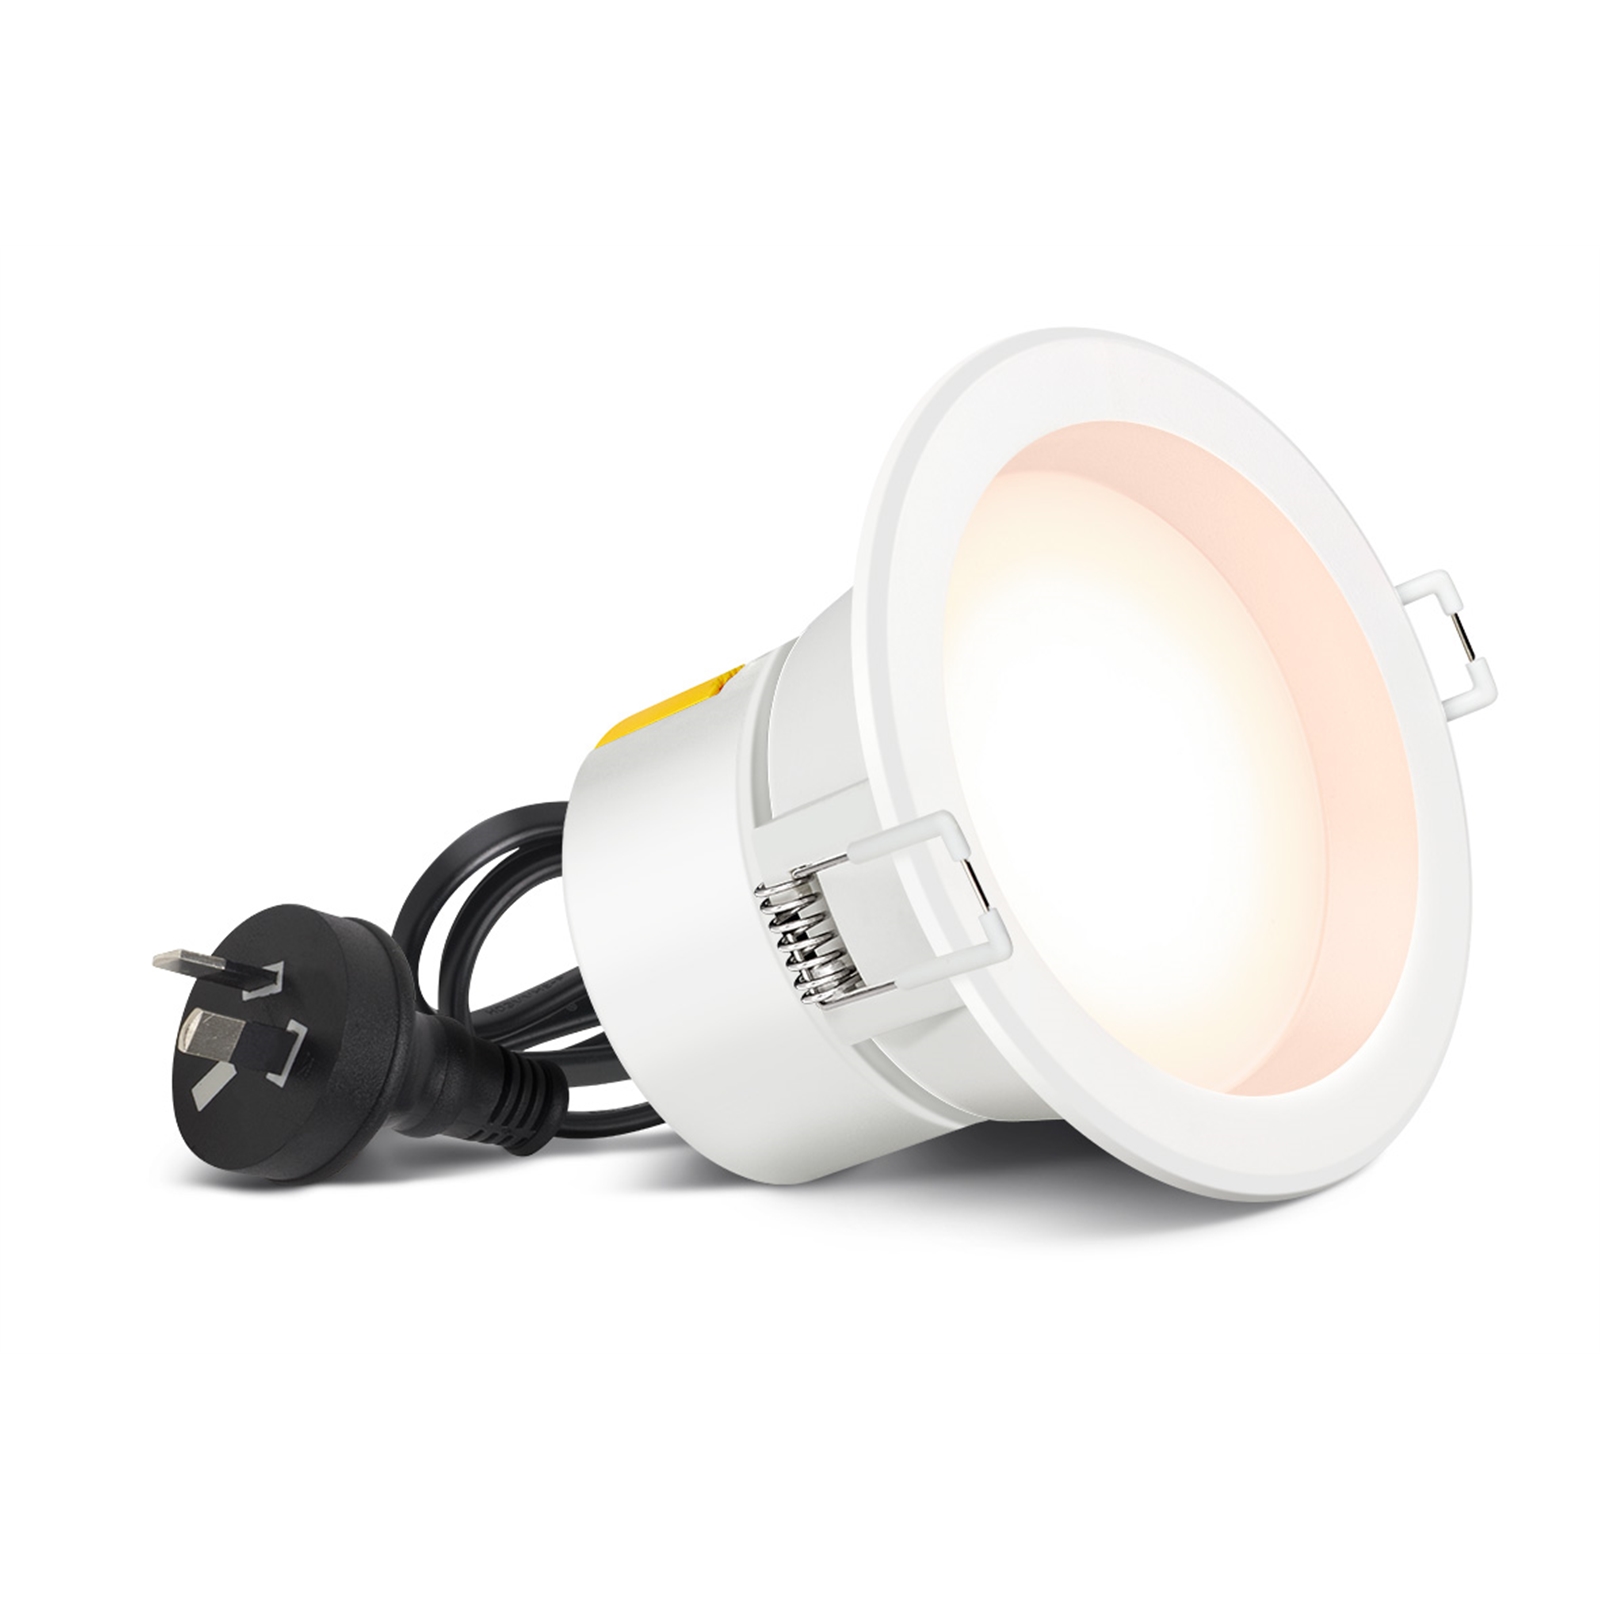 HPM 7W Cool White LED Dimmable Fixed Downlight